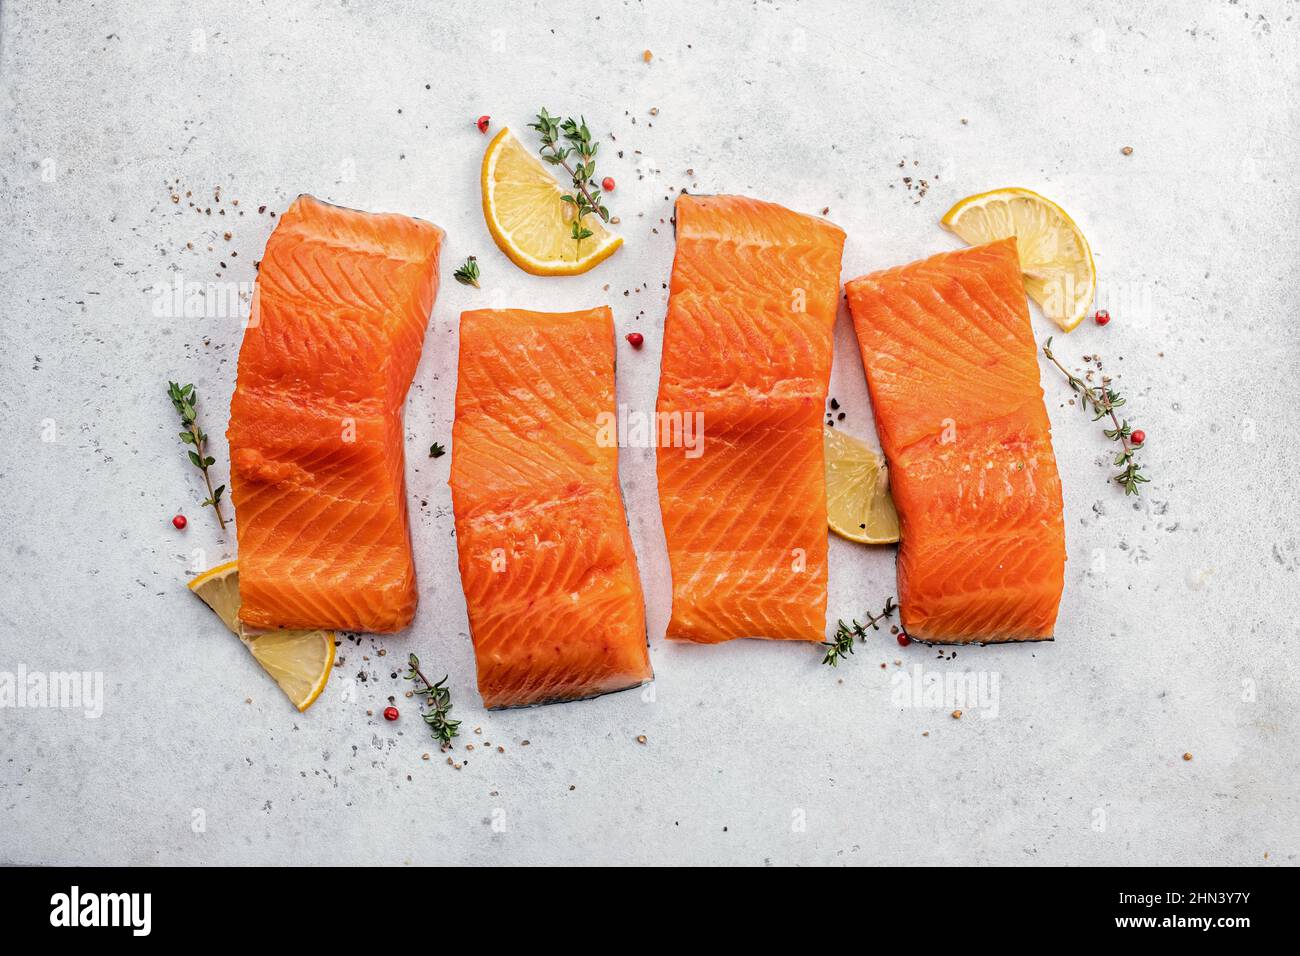 Salmon. Fresh raw salmon fish fillet with cooking ingredients, herbs ...